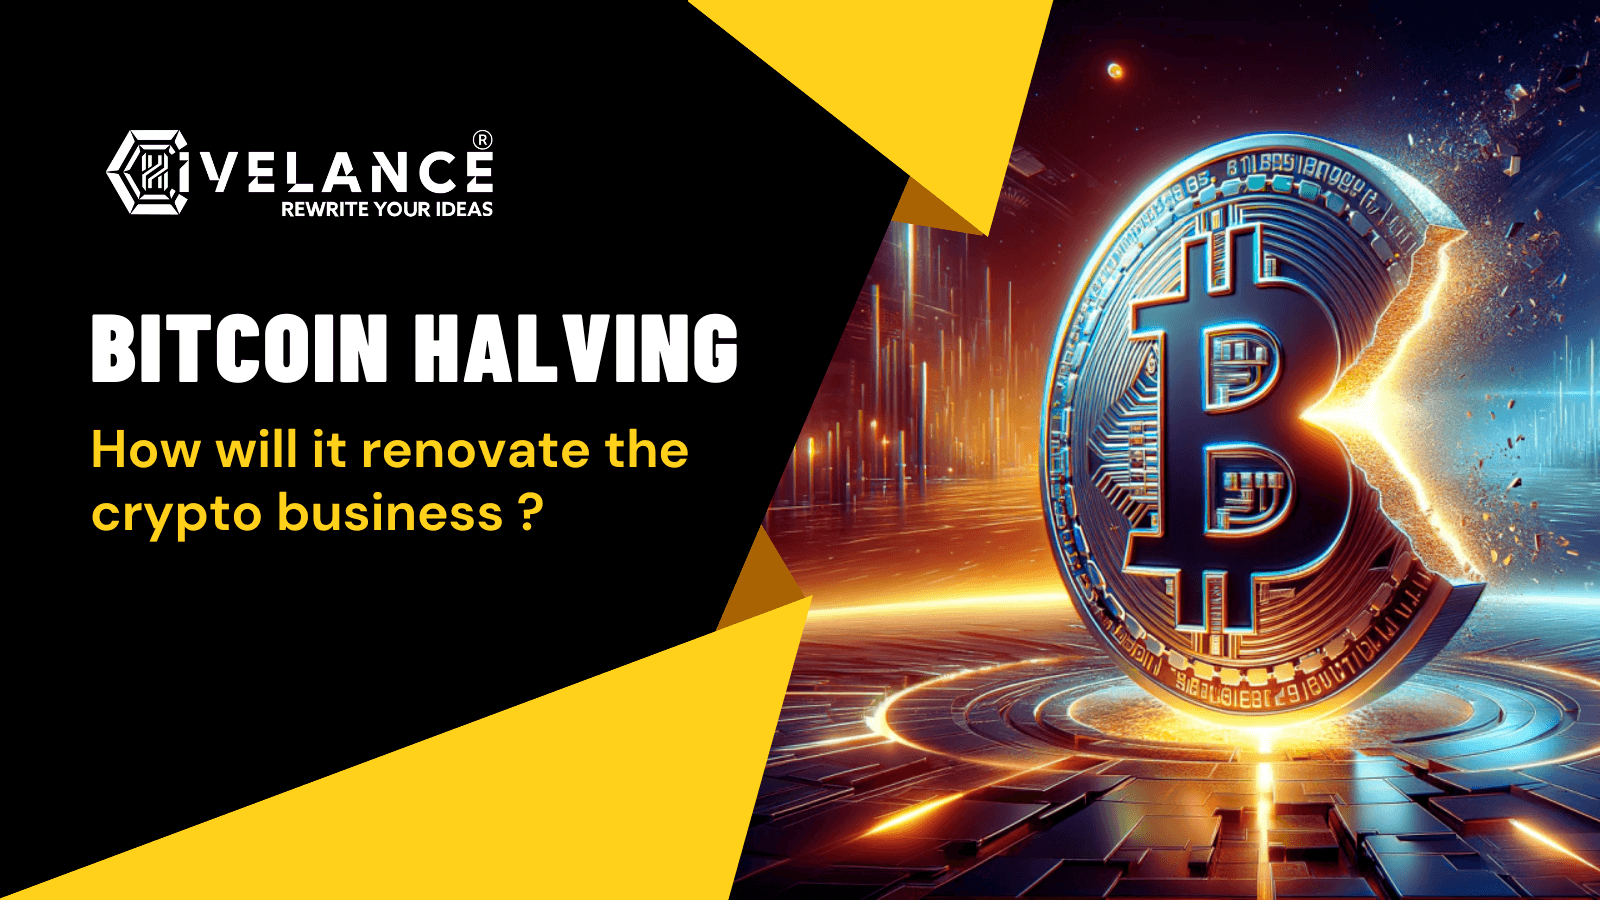 Bitcoin halving: How will it renovate the crypto business?